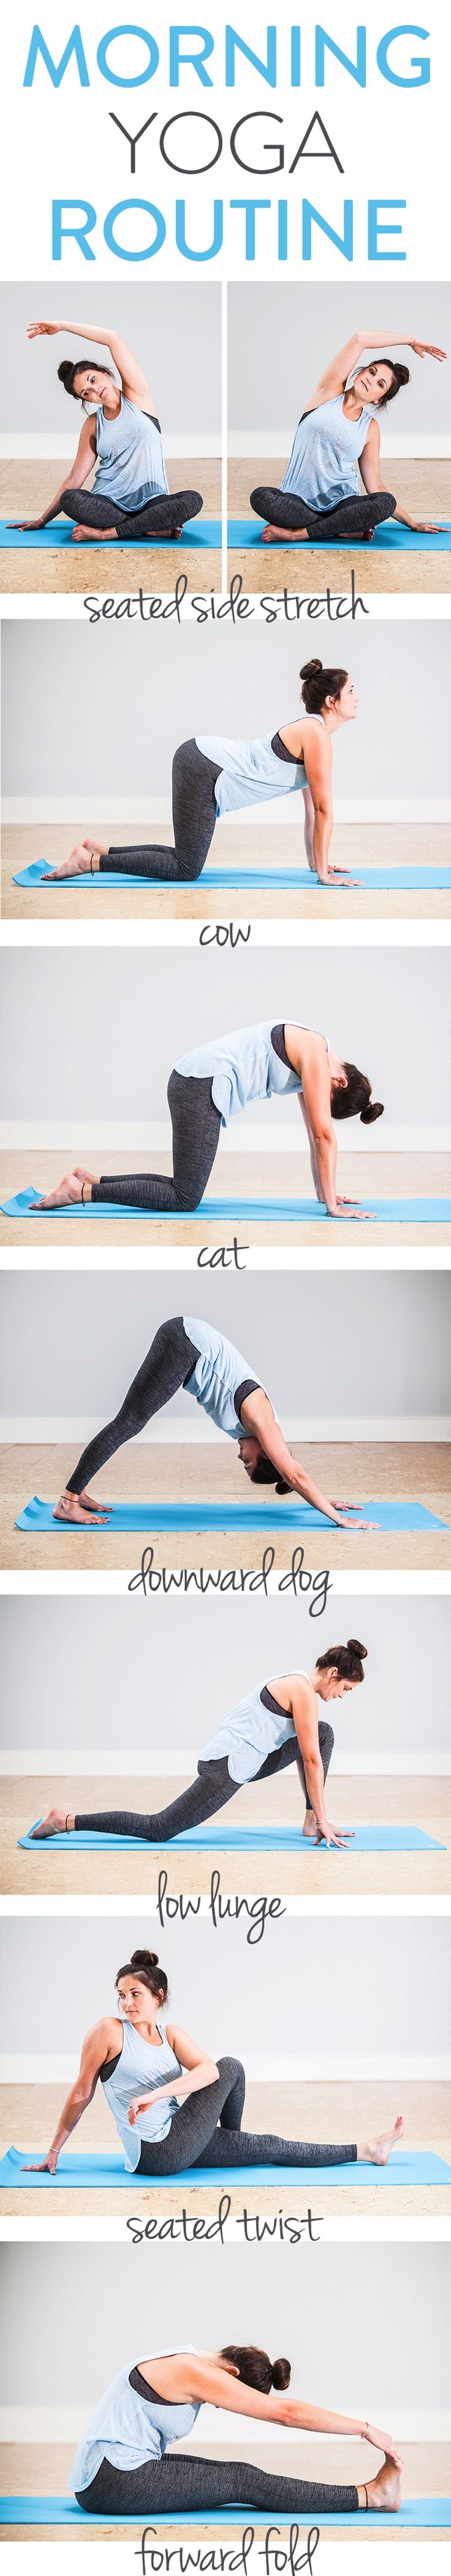 10 Minute Morning Yoga Routine